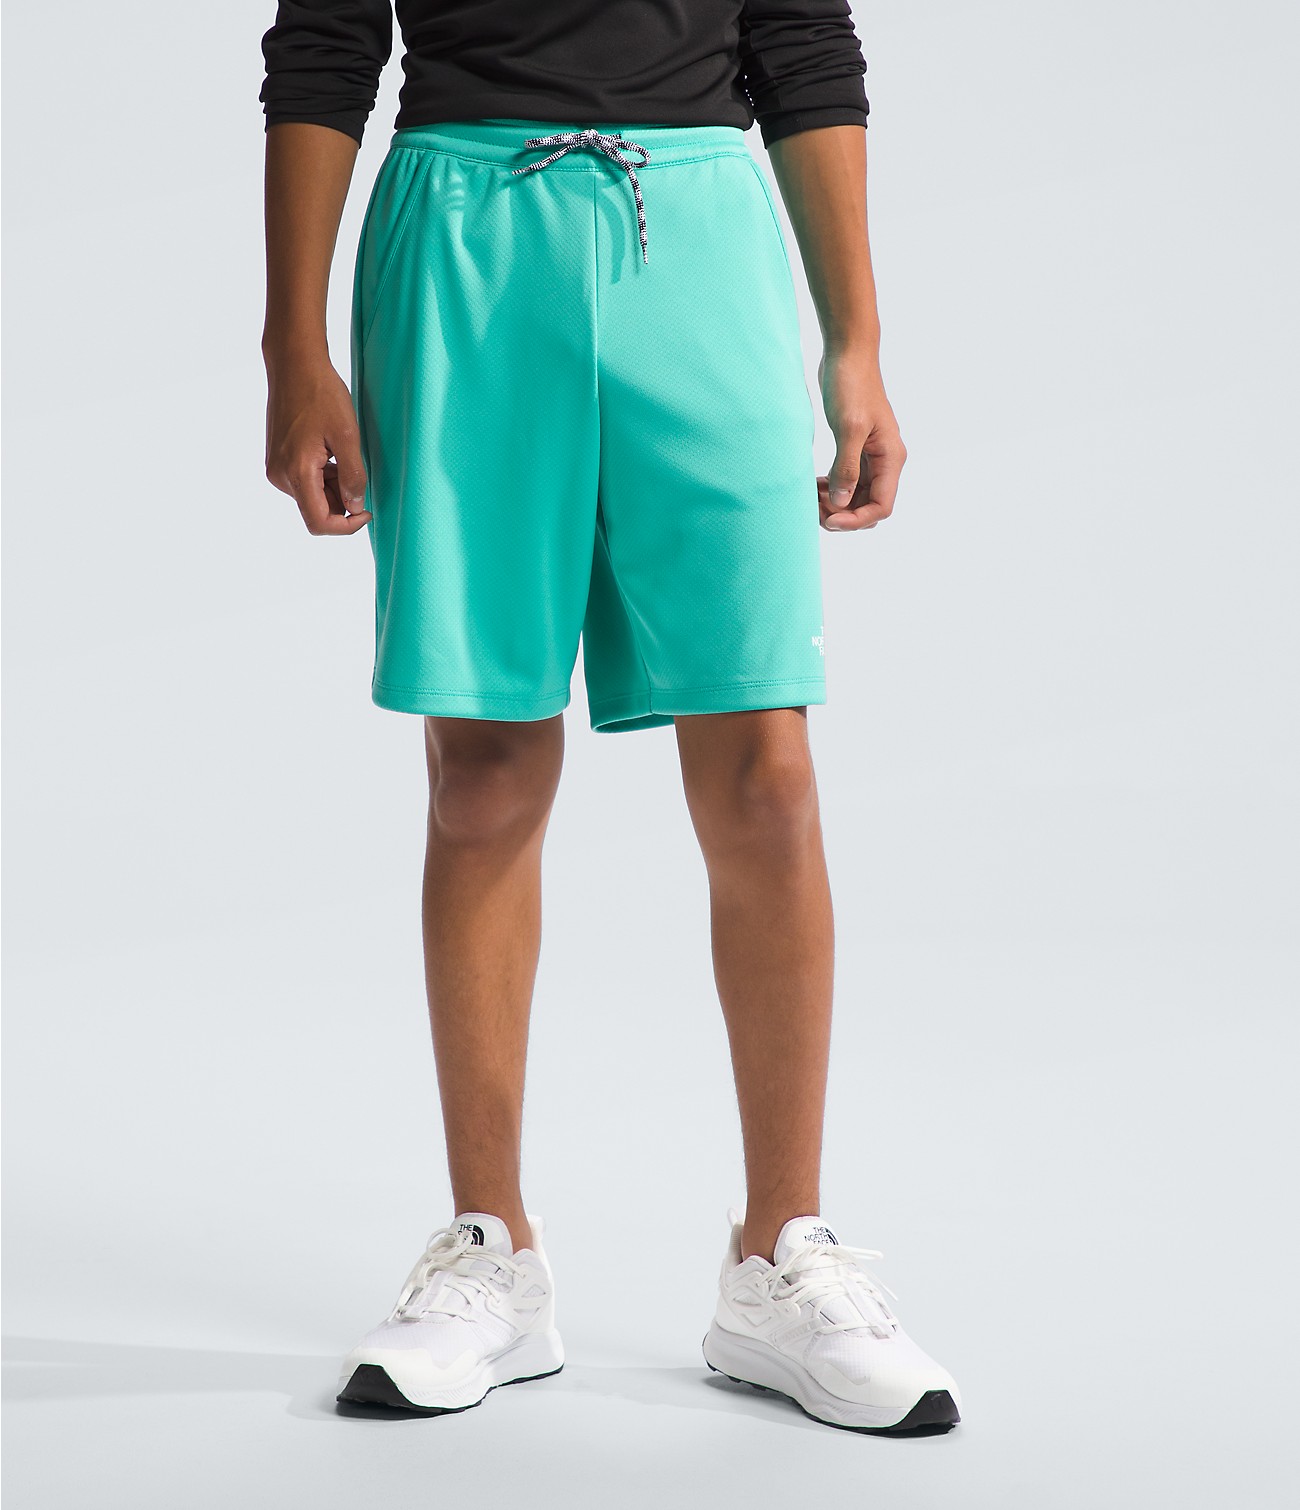 Boys’ Never Stop Shorts | The North Face